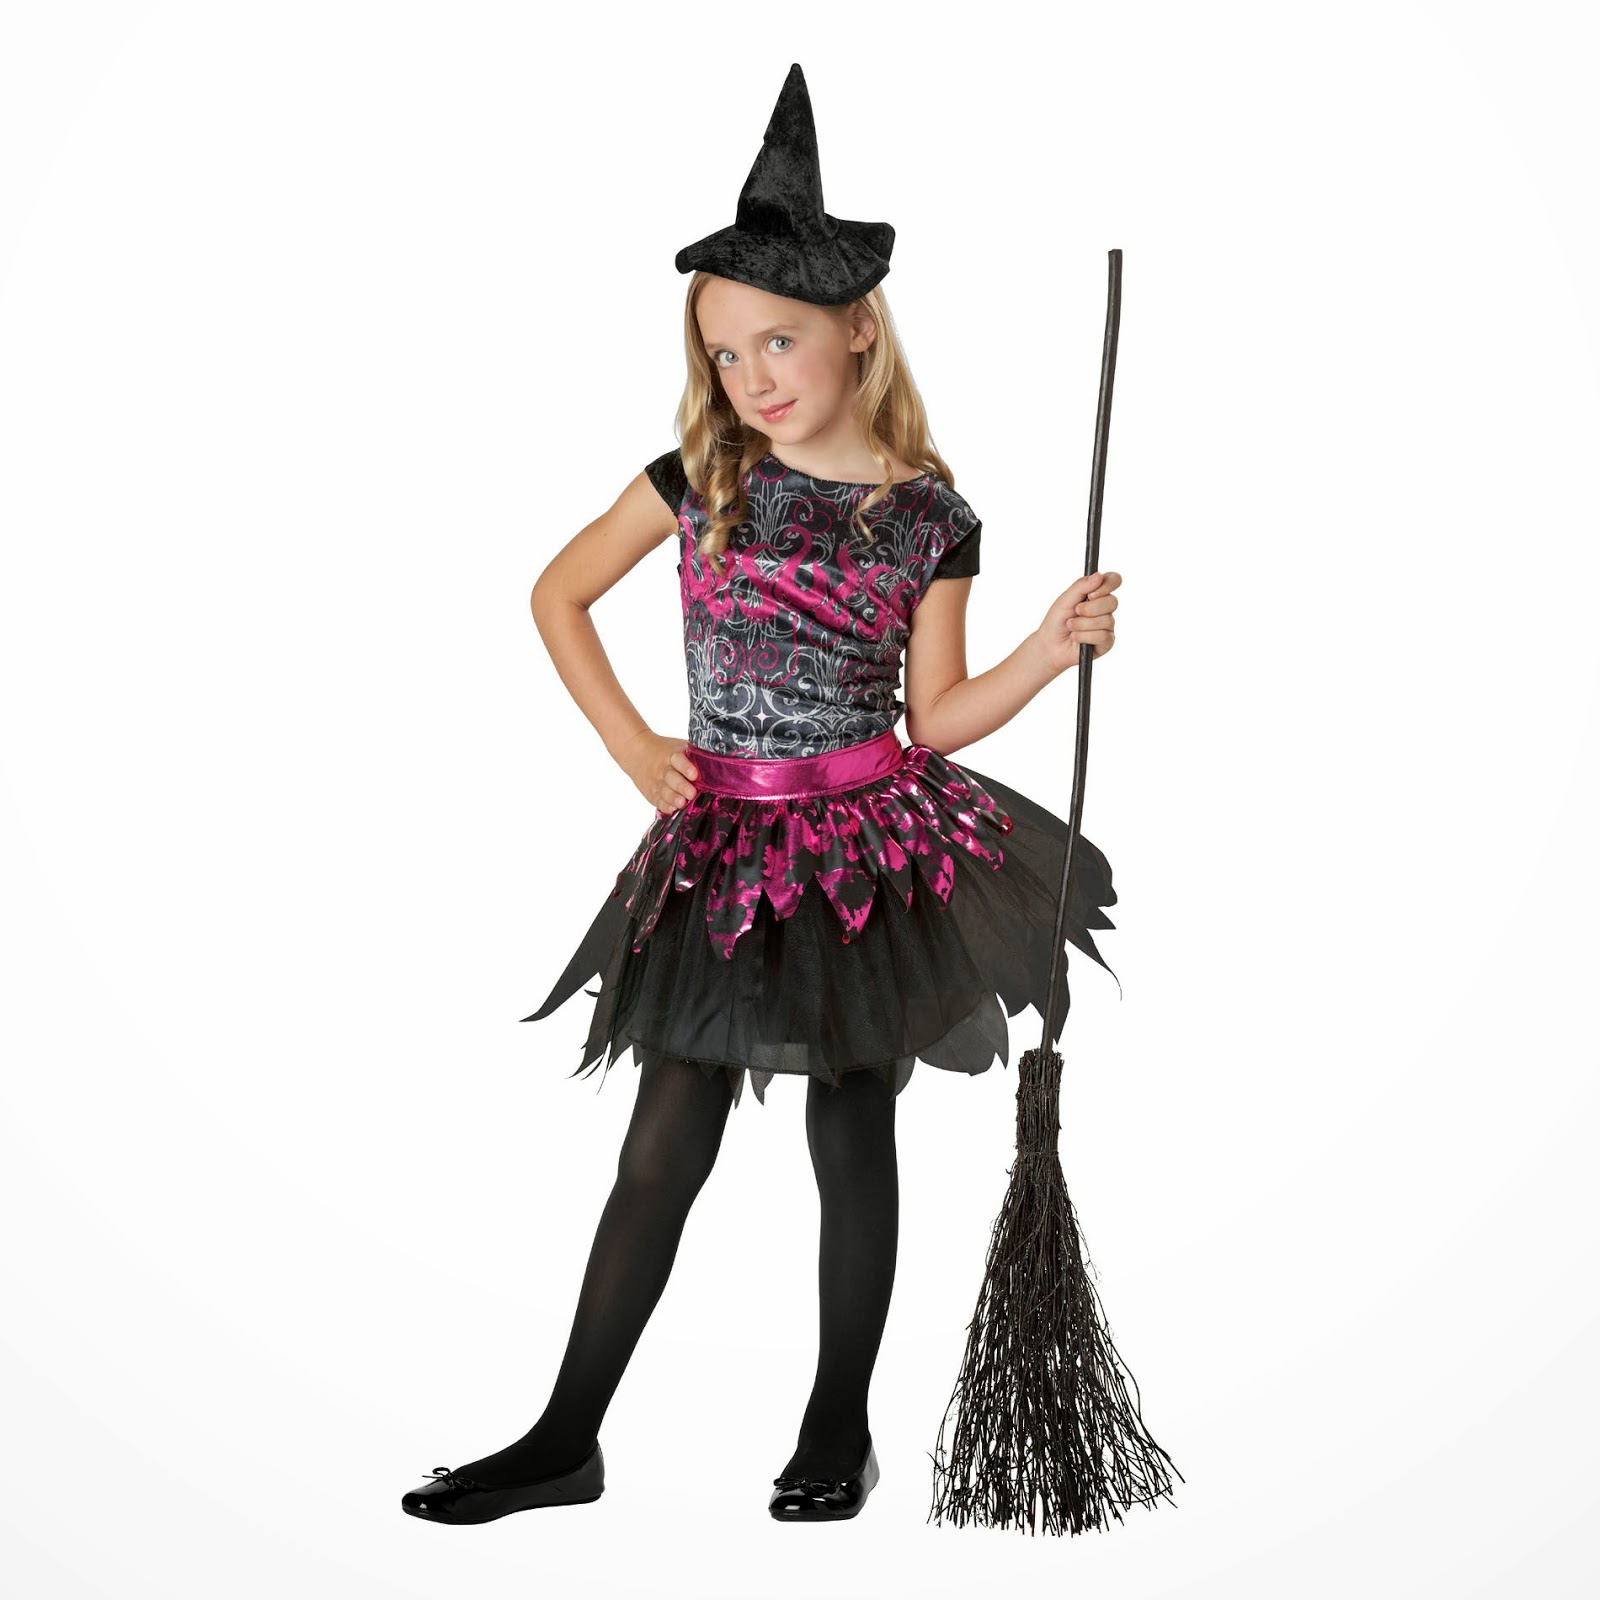 Hd Wallpapers Blog: Halloween Costumes for Girls